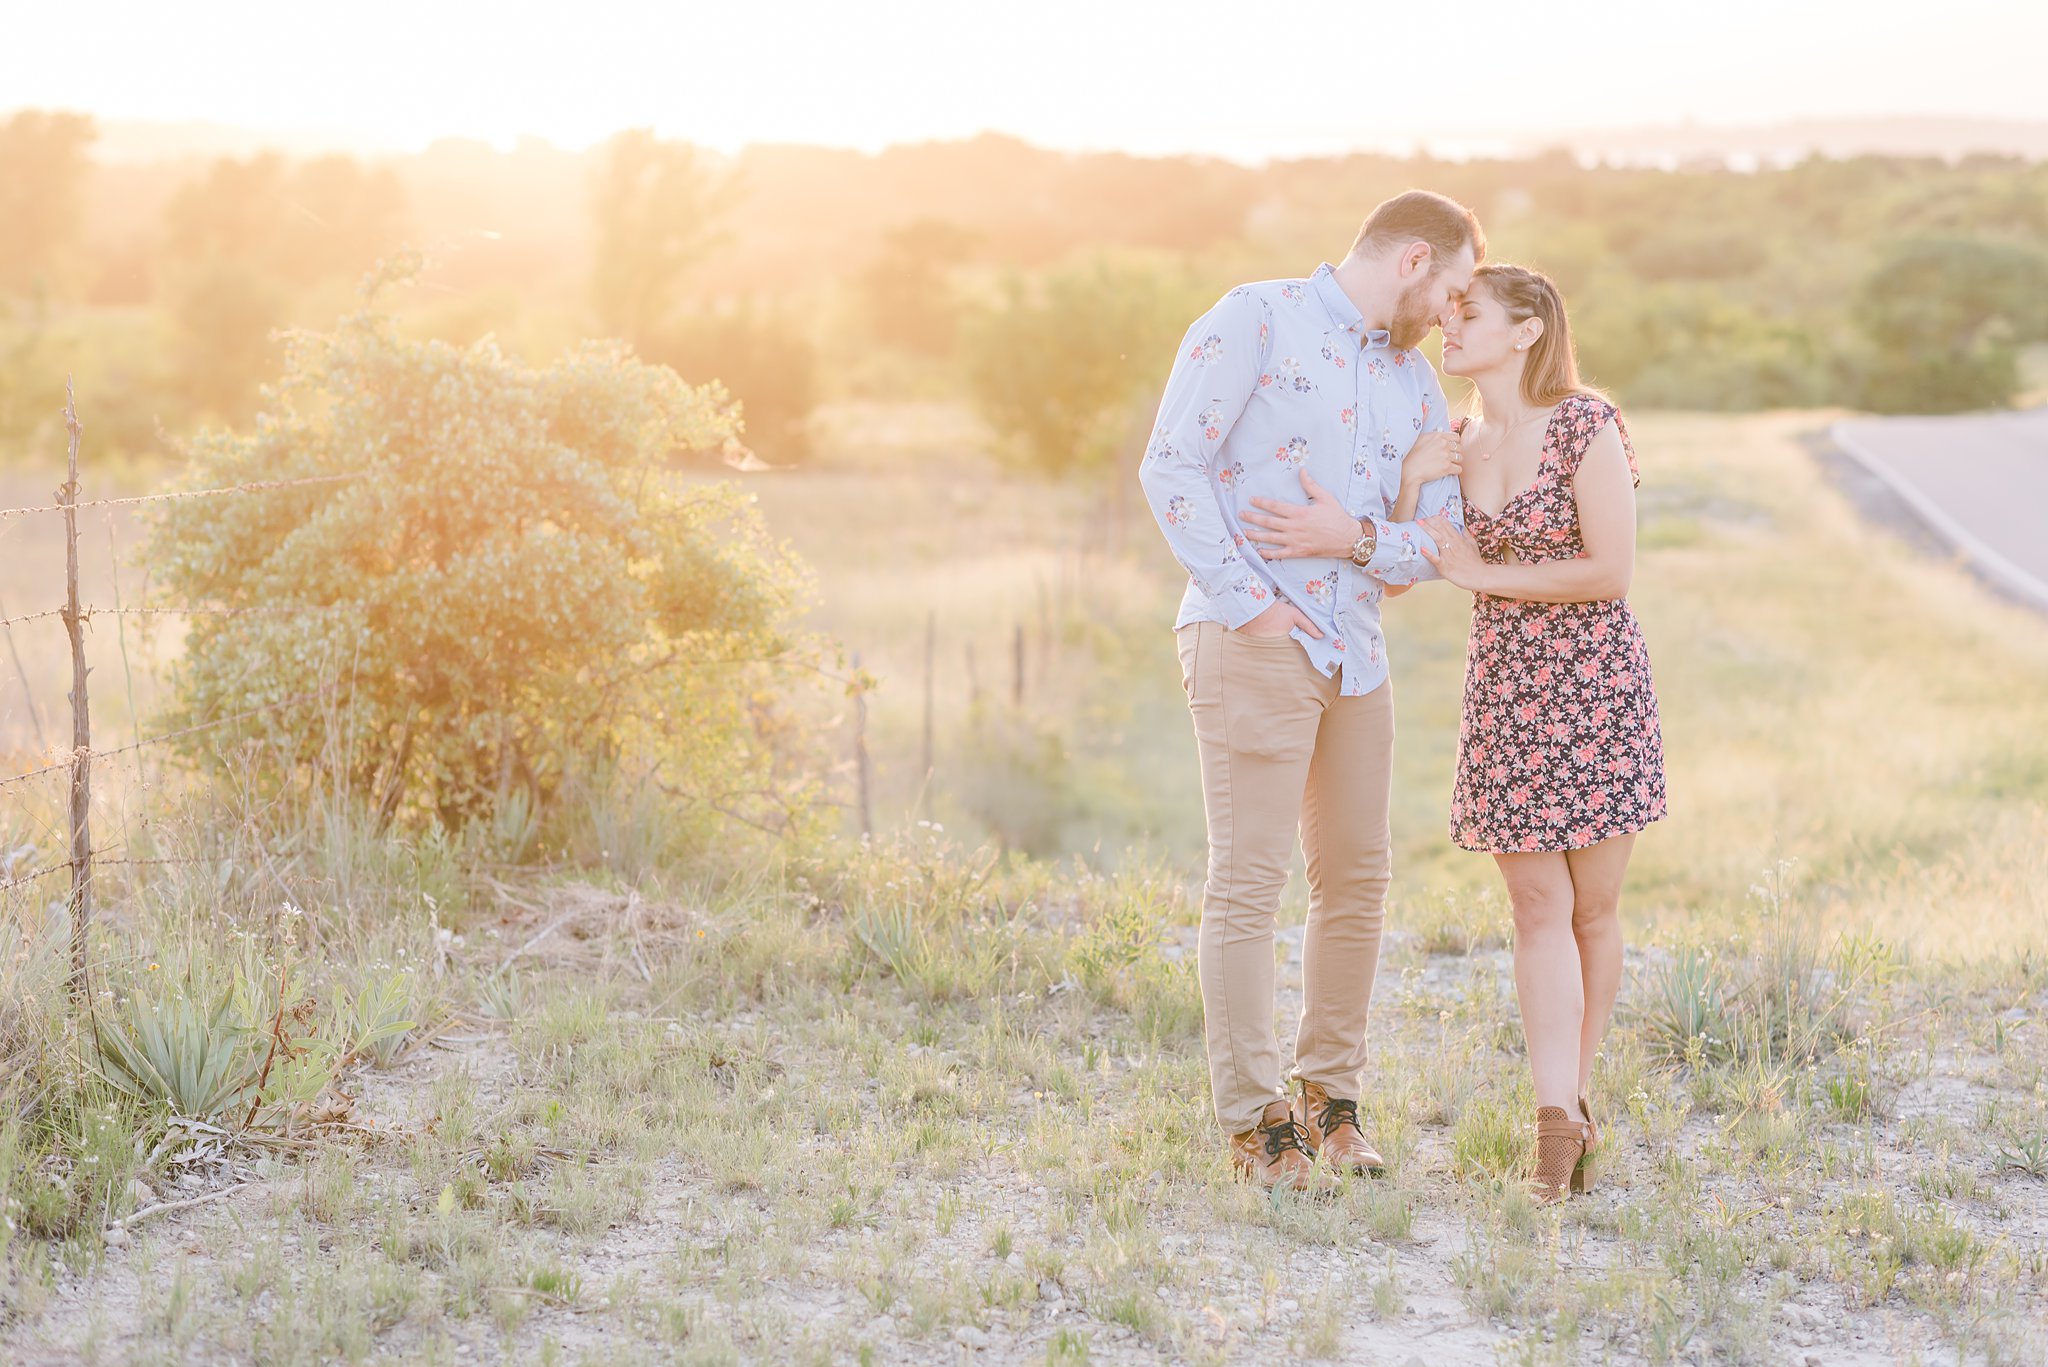 Fort Worth engagement session, fort worth portraits, fort worth portrait photographer, fort worth wedding photographer, fort worth wedding venue, eagle mountain lake engagement session, texas lake house engagement session,